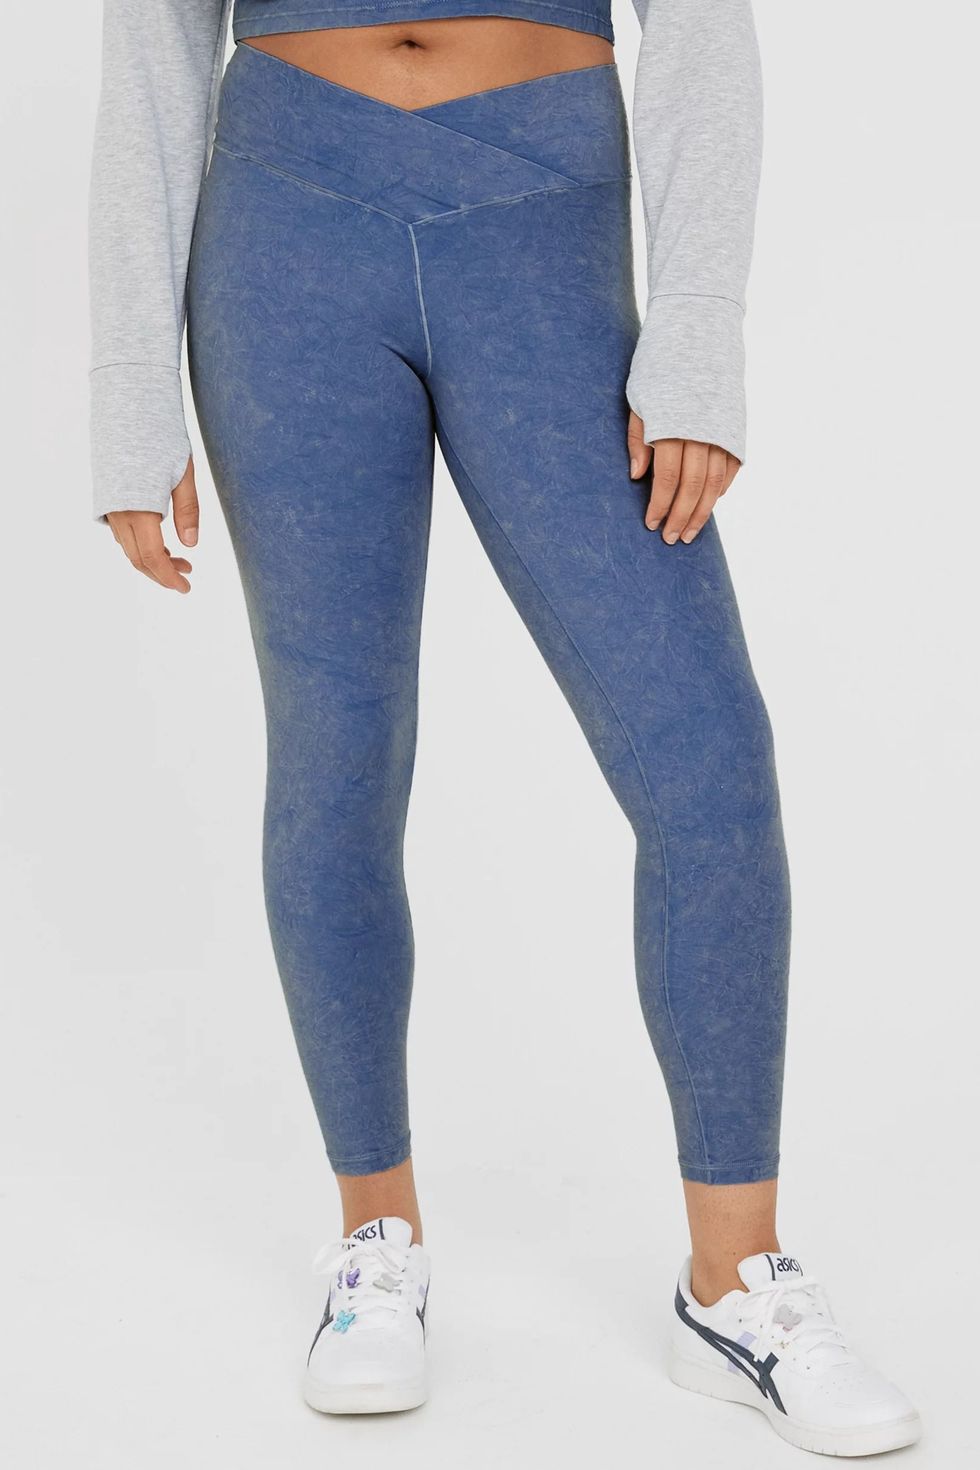 Aerie's Crossover Leggings Are Now on Sale, Starting at 25% Off